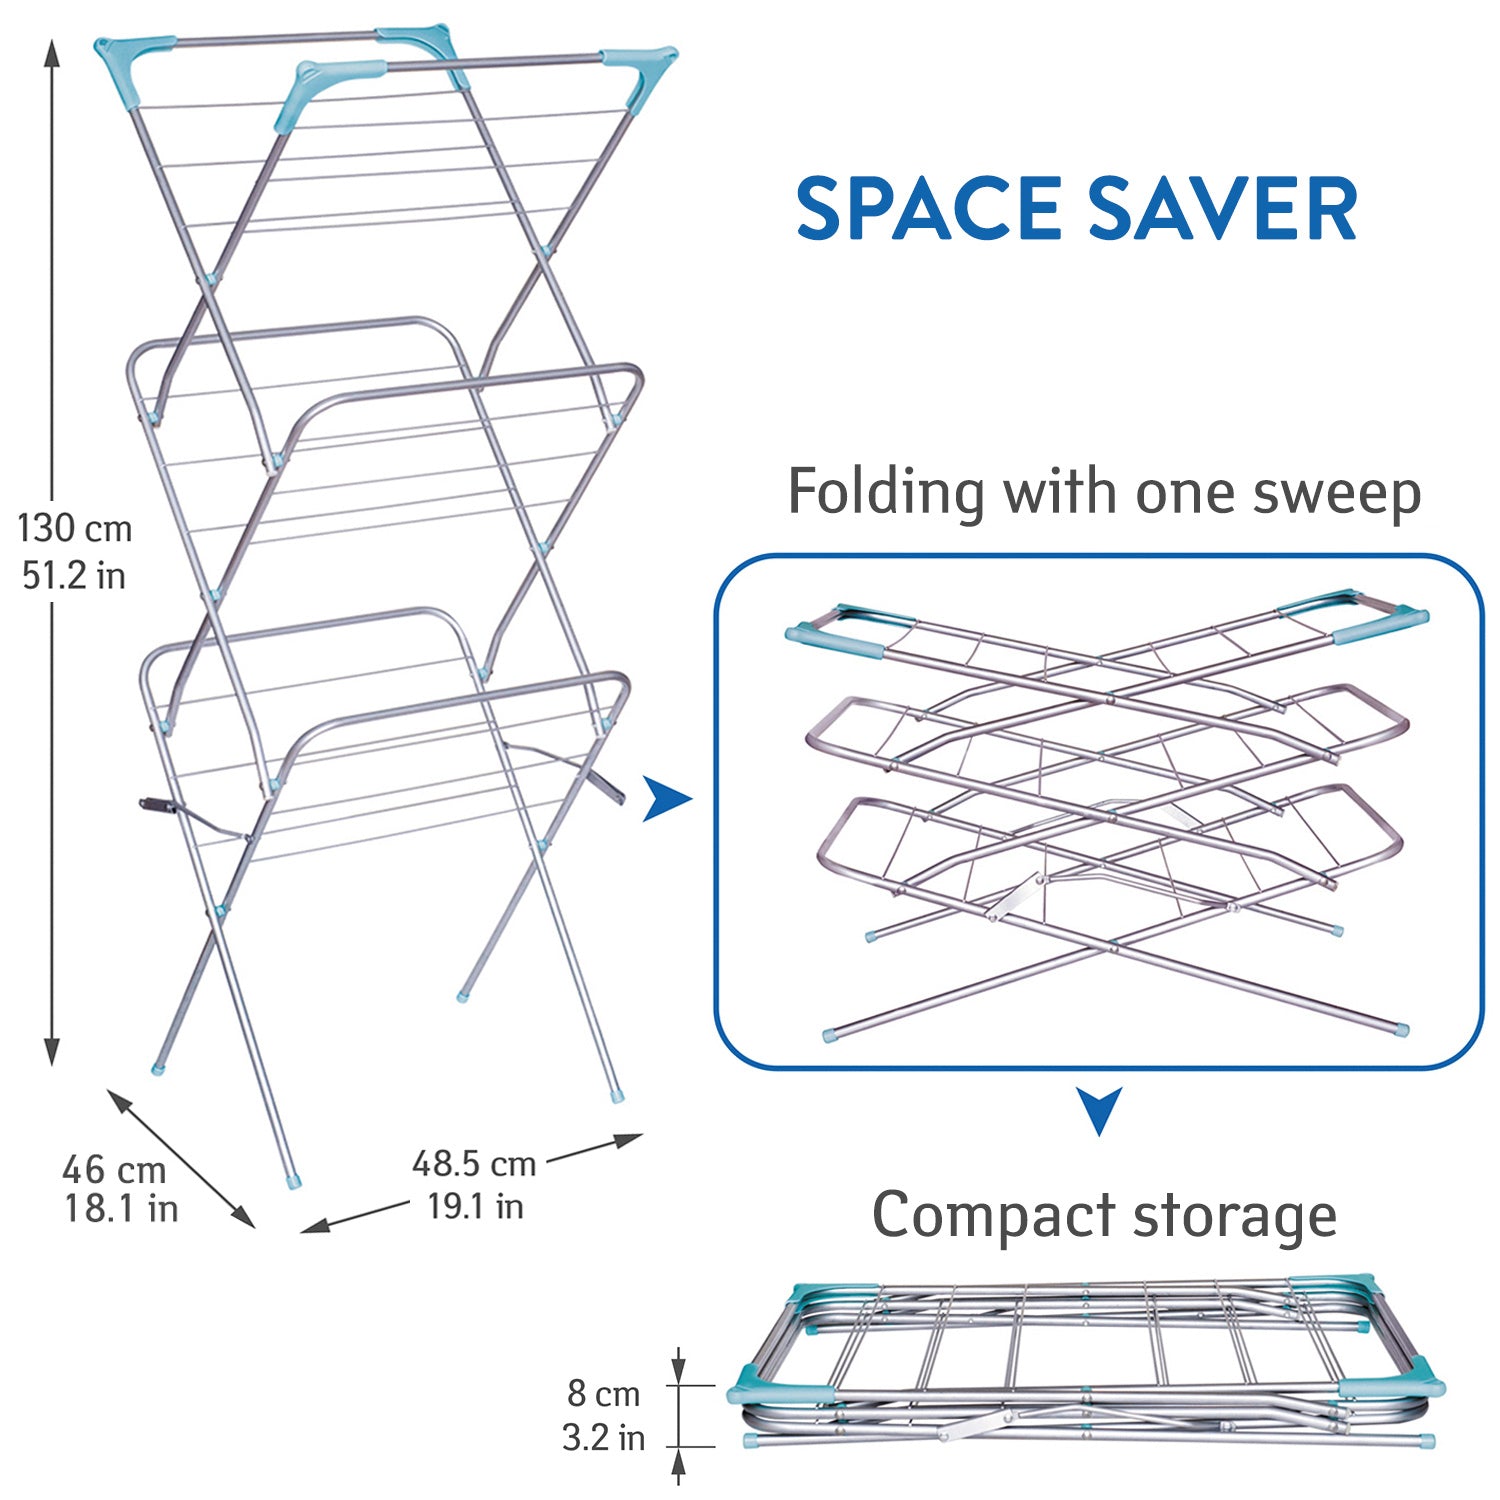 art moon Niagara - Clothes Airer, Clothes Drying Rack, Clothes Horse Small, Collapsible Dryer, Set Up with Two Clicks